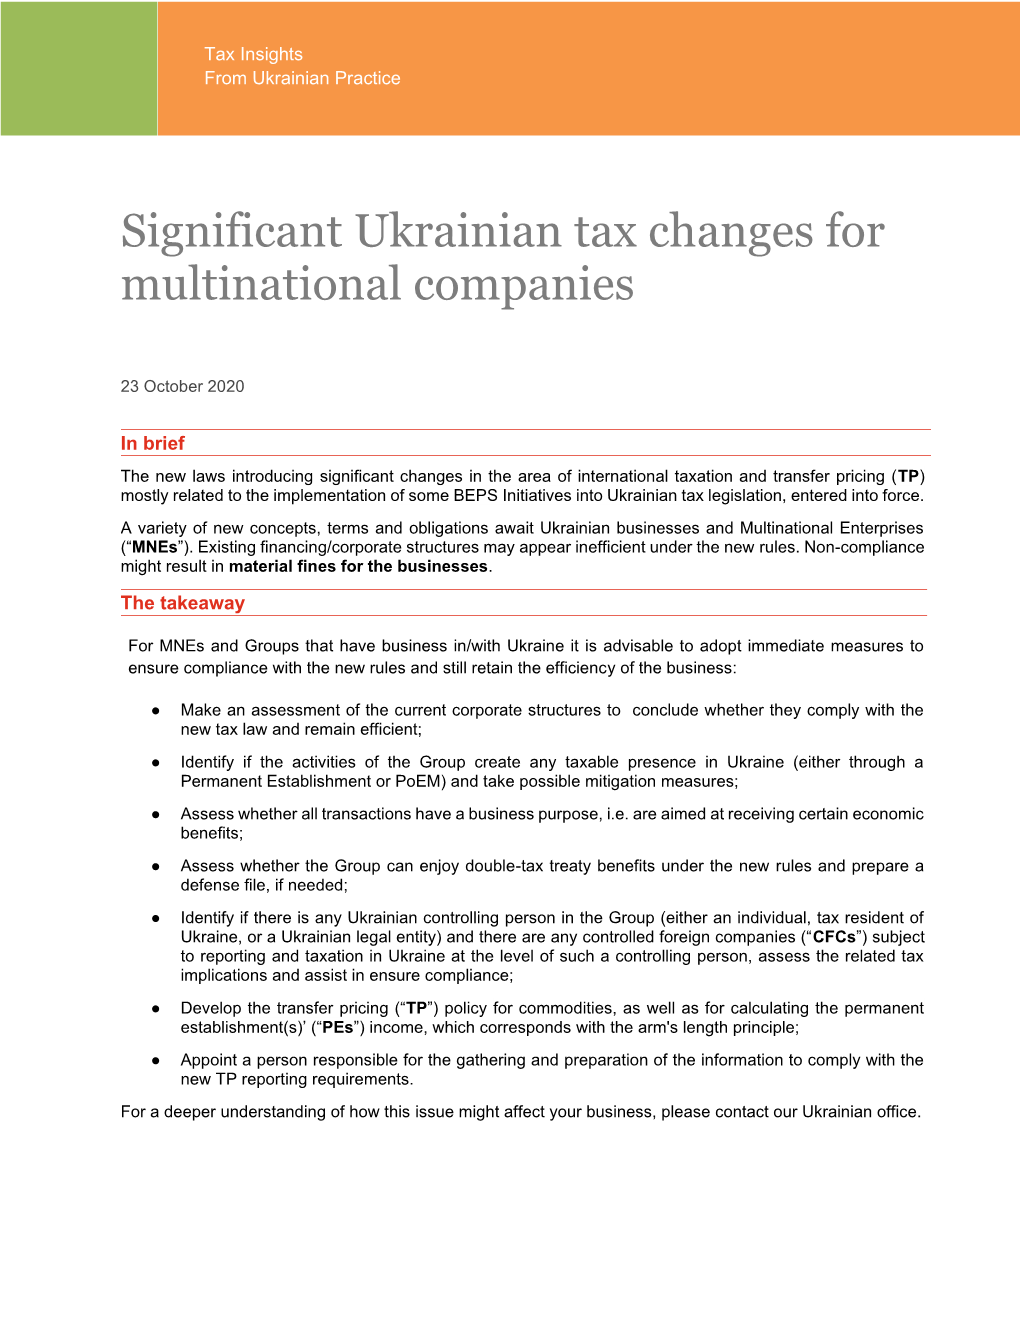 Significant Ukrainian Tax Changes for Multinational Companies